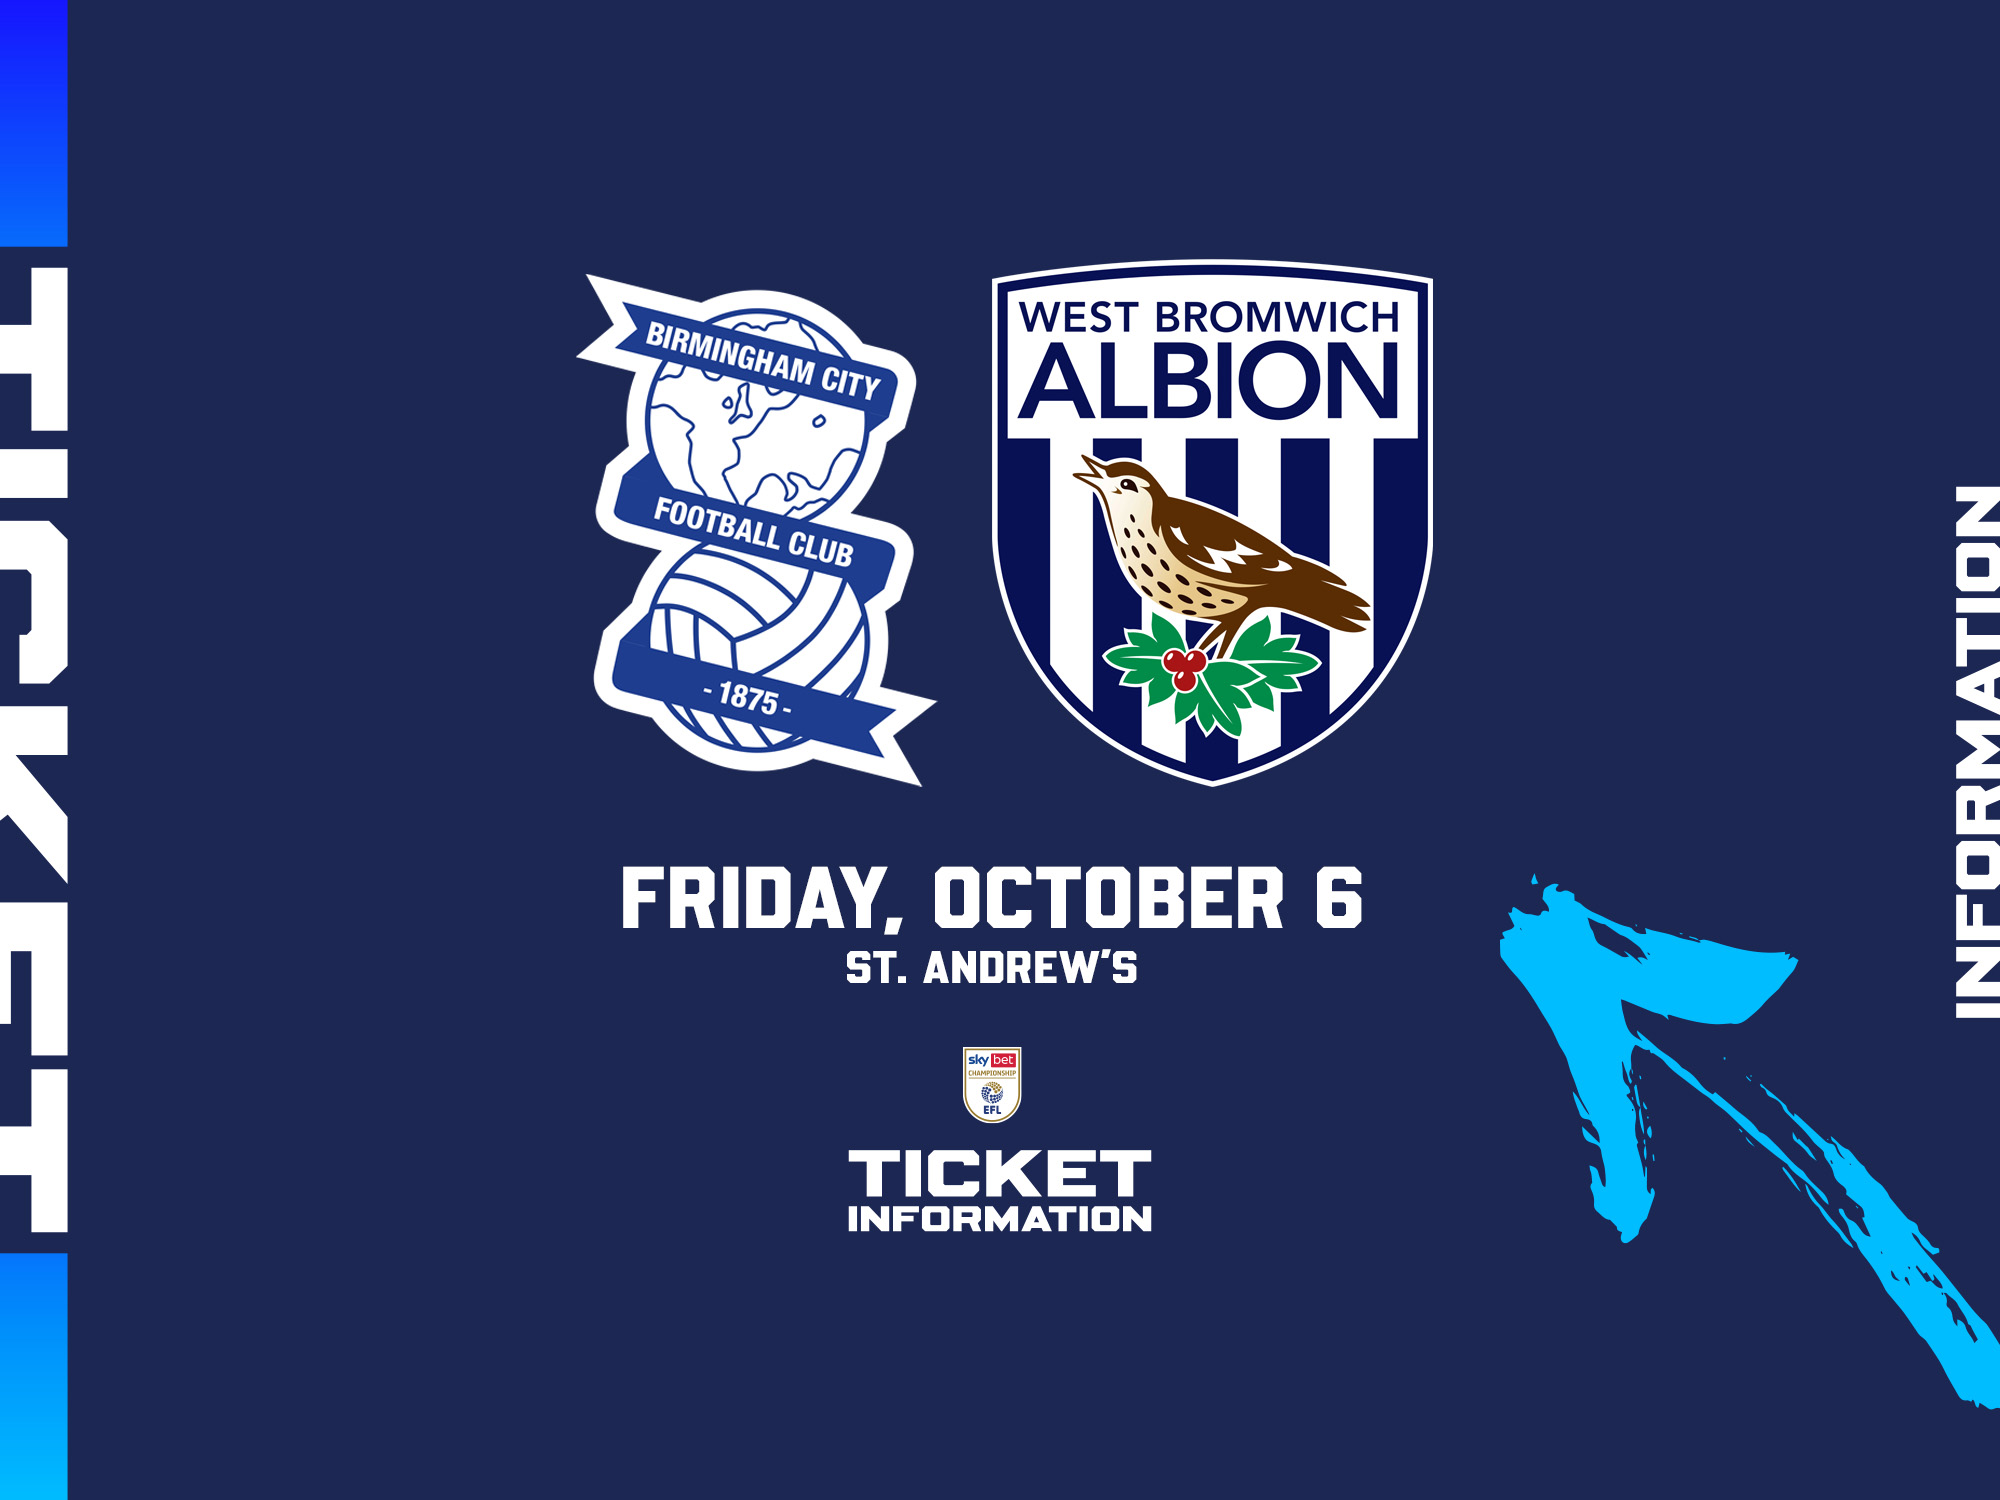 Birmingham City and WBA badges on the ticket graphic for the Championship fixture